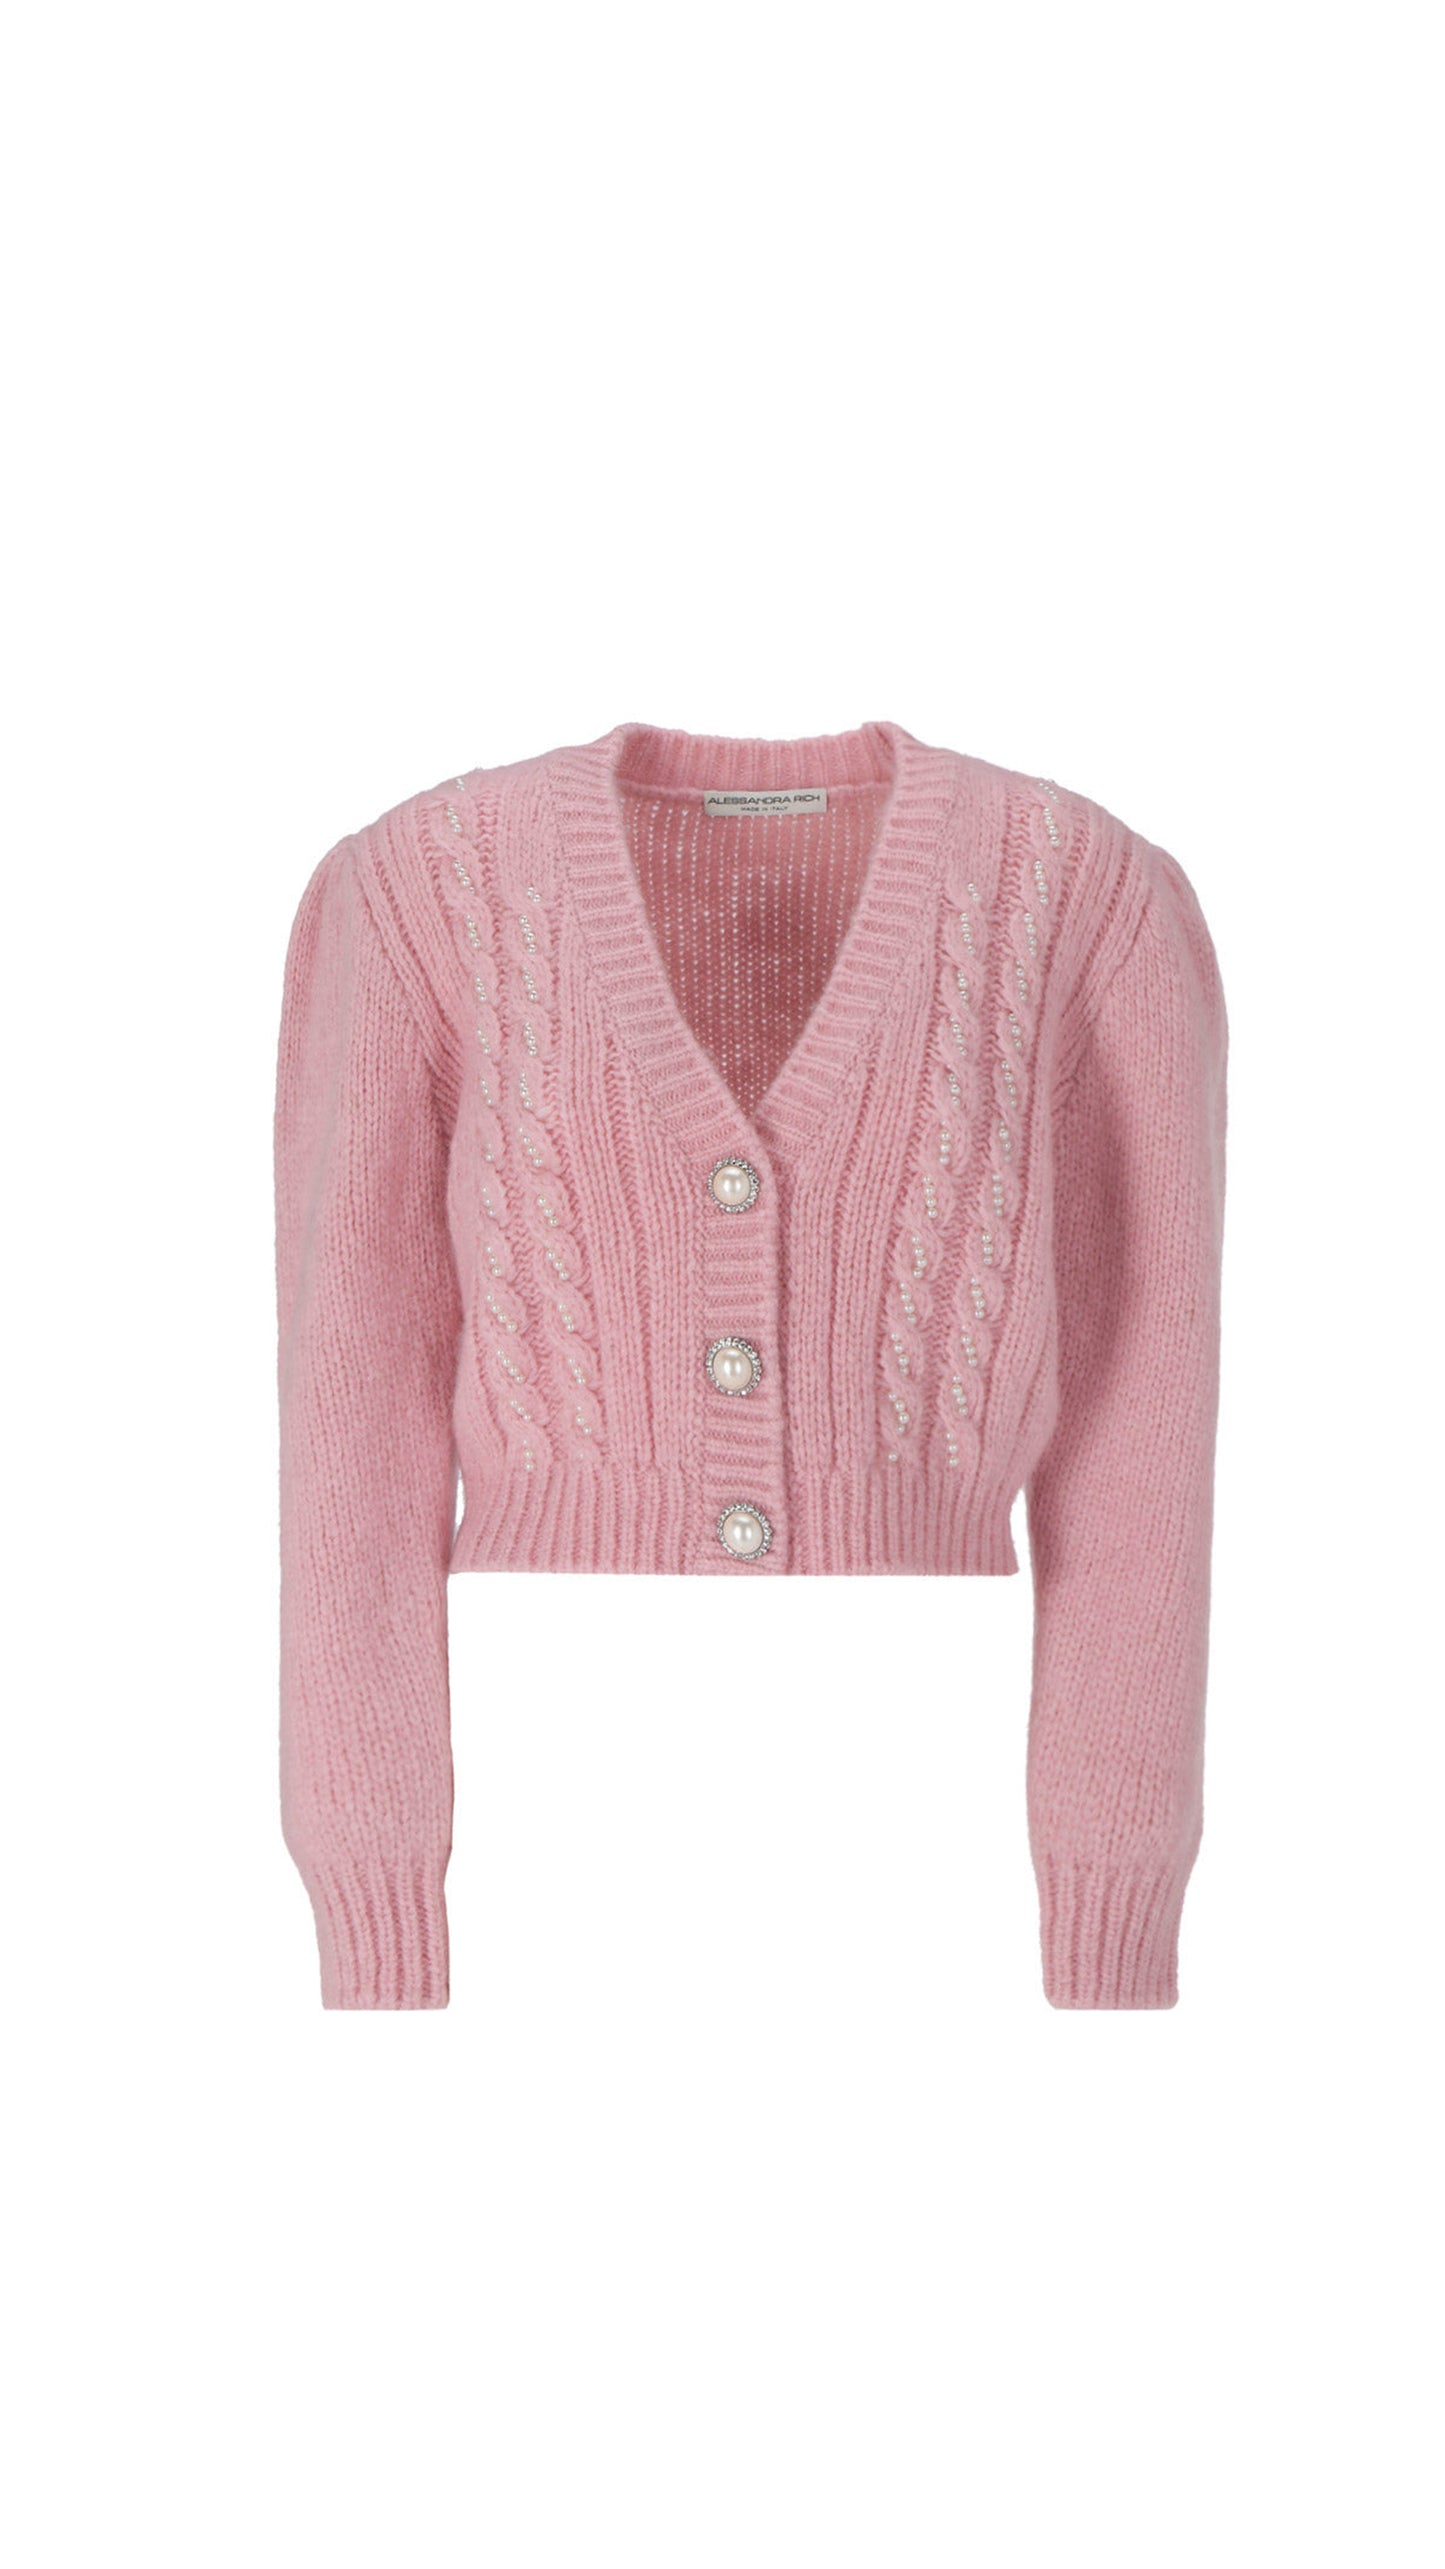 Cable Knit Cardigan With Pearls - Pink